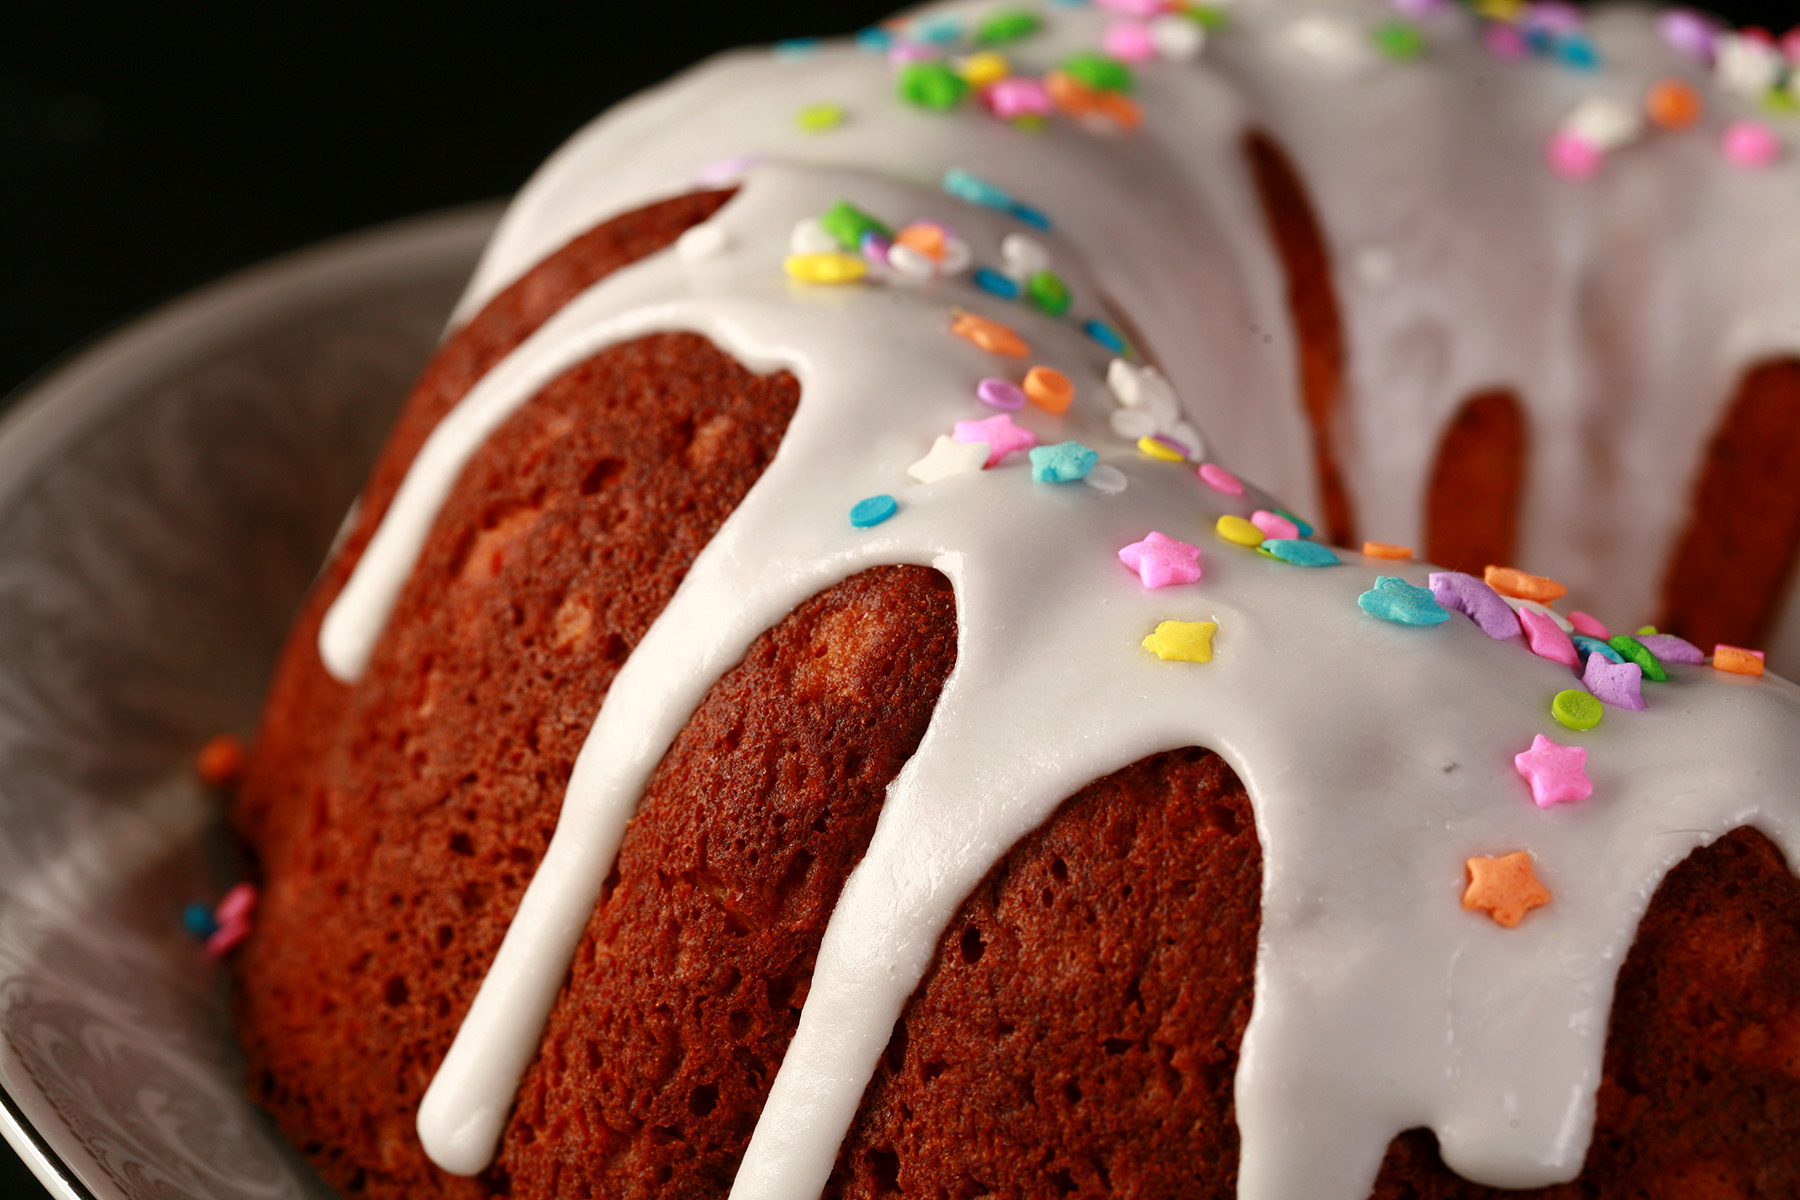 A close up view of a gluten-free paska. It's in the shape of a bundt pan, with dripping white glaze and topped with pastel coloured sprinkles.